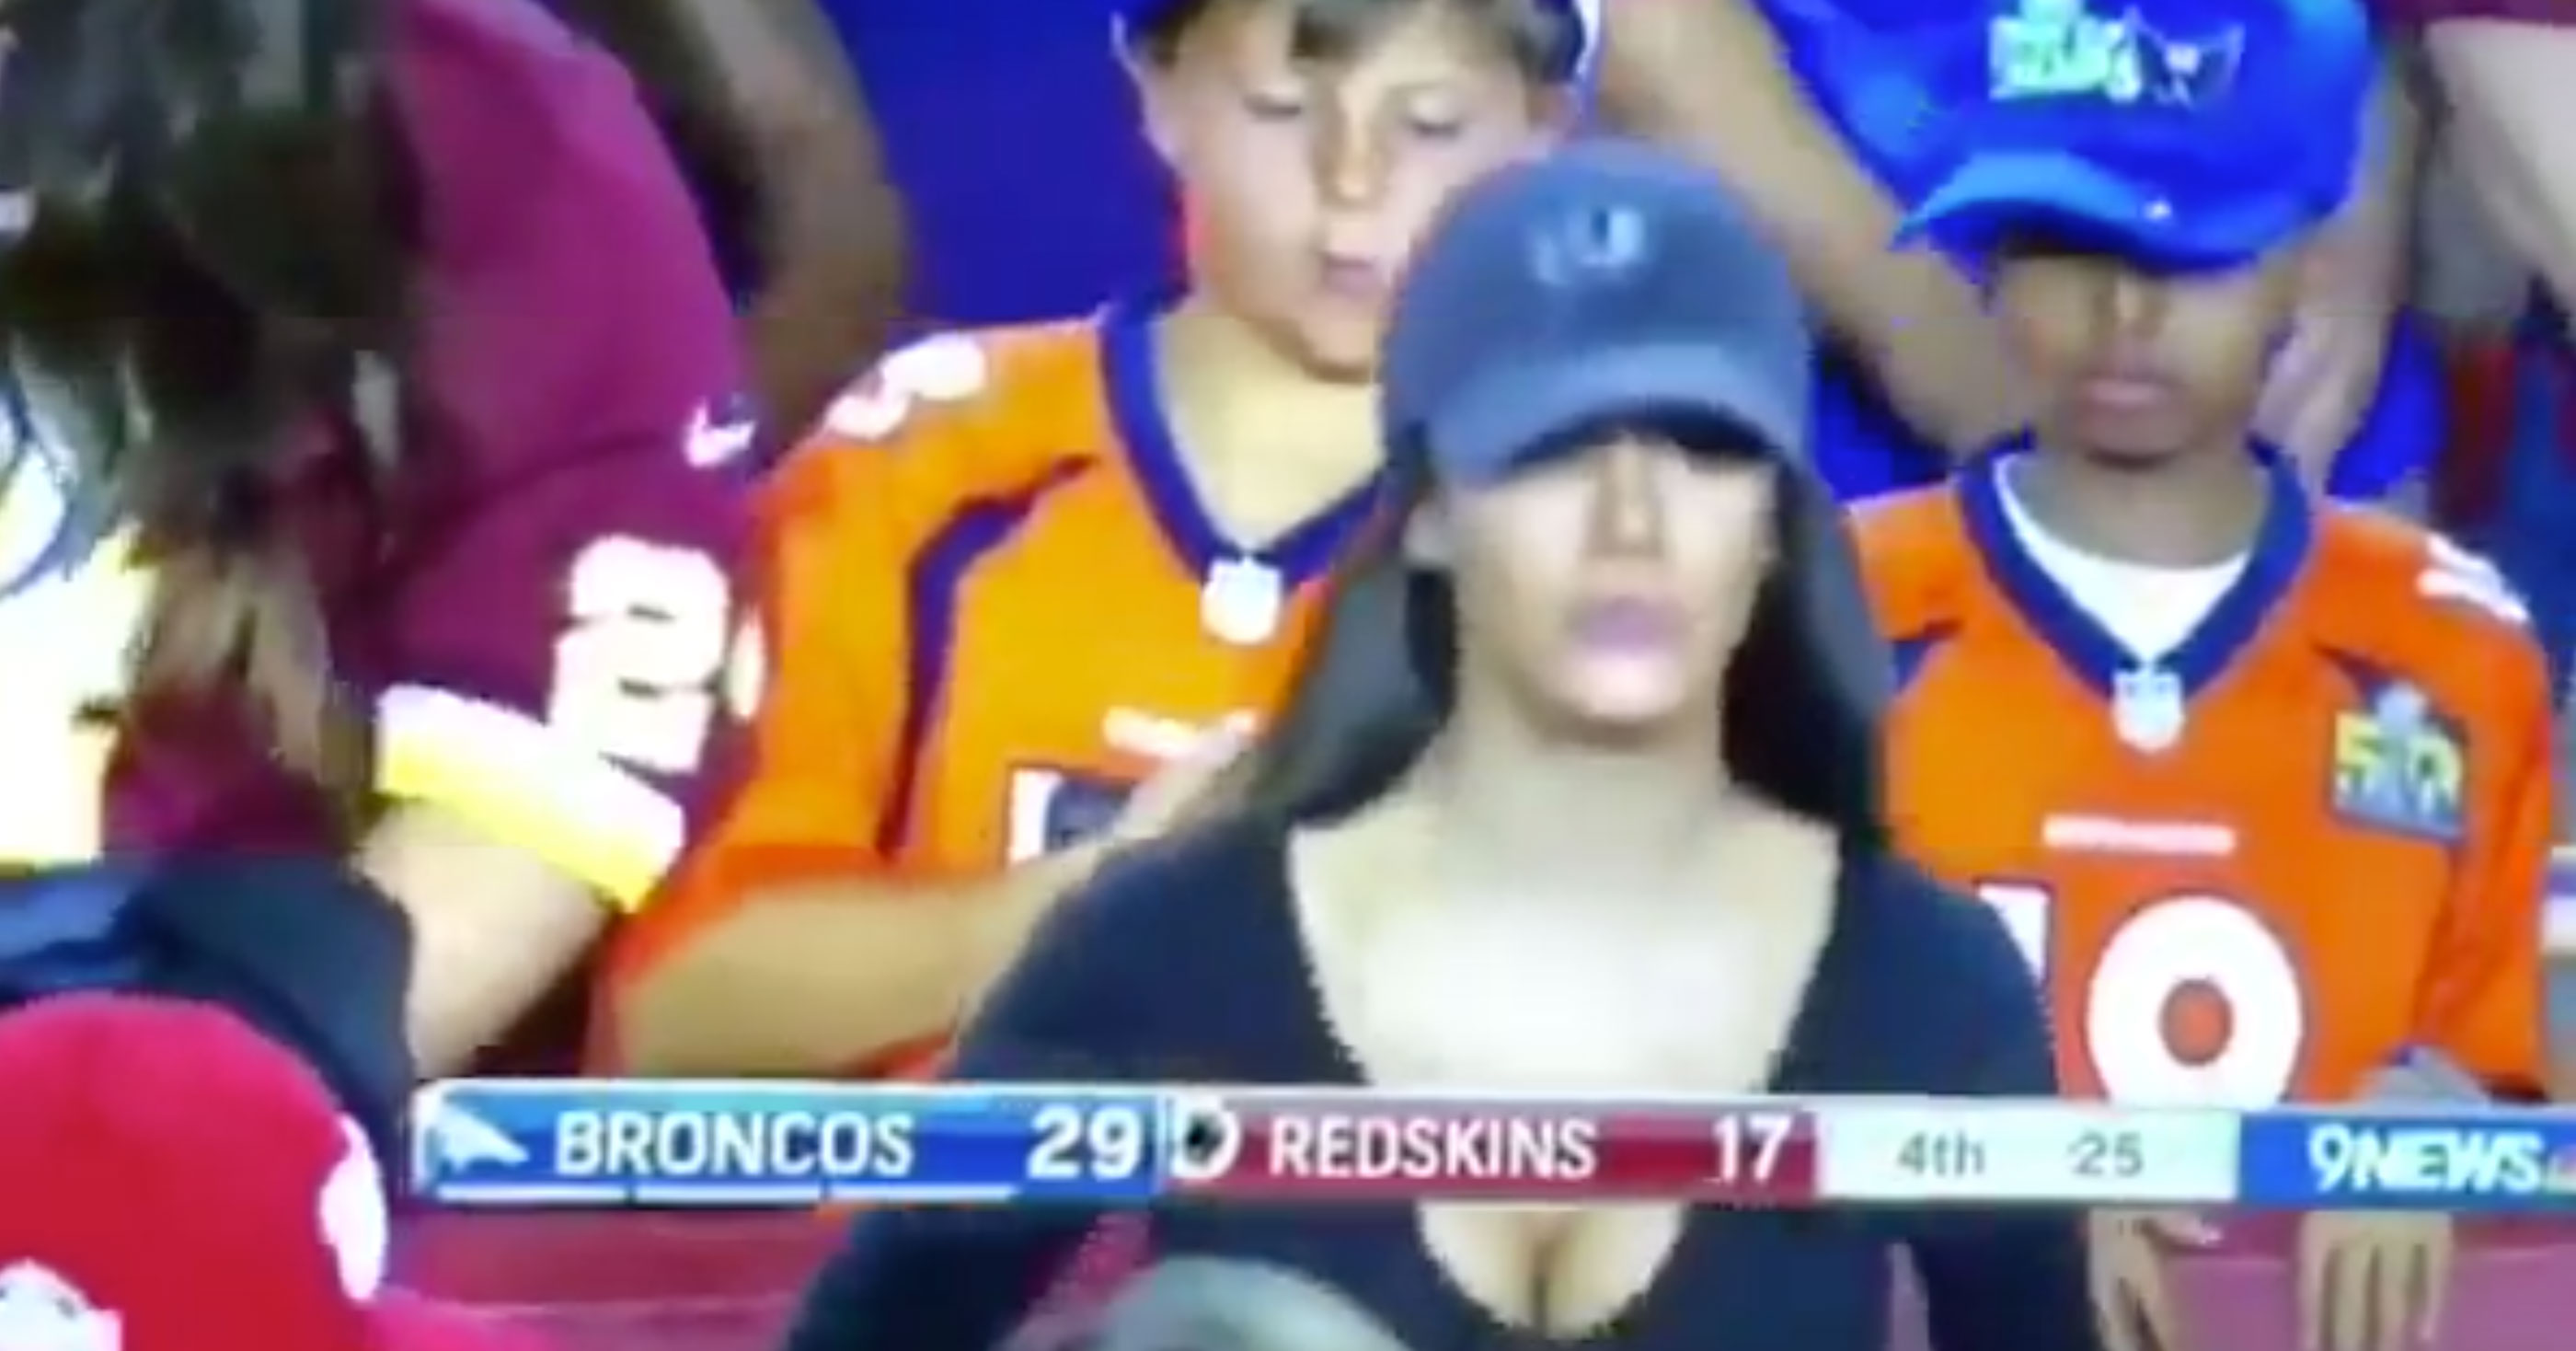 Smoking Hot Fan Mesmerizes Two Young Kids At Redskins-Broncos Game (VIDEO)